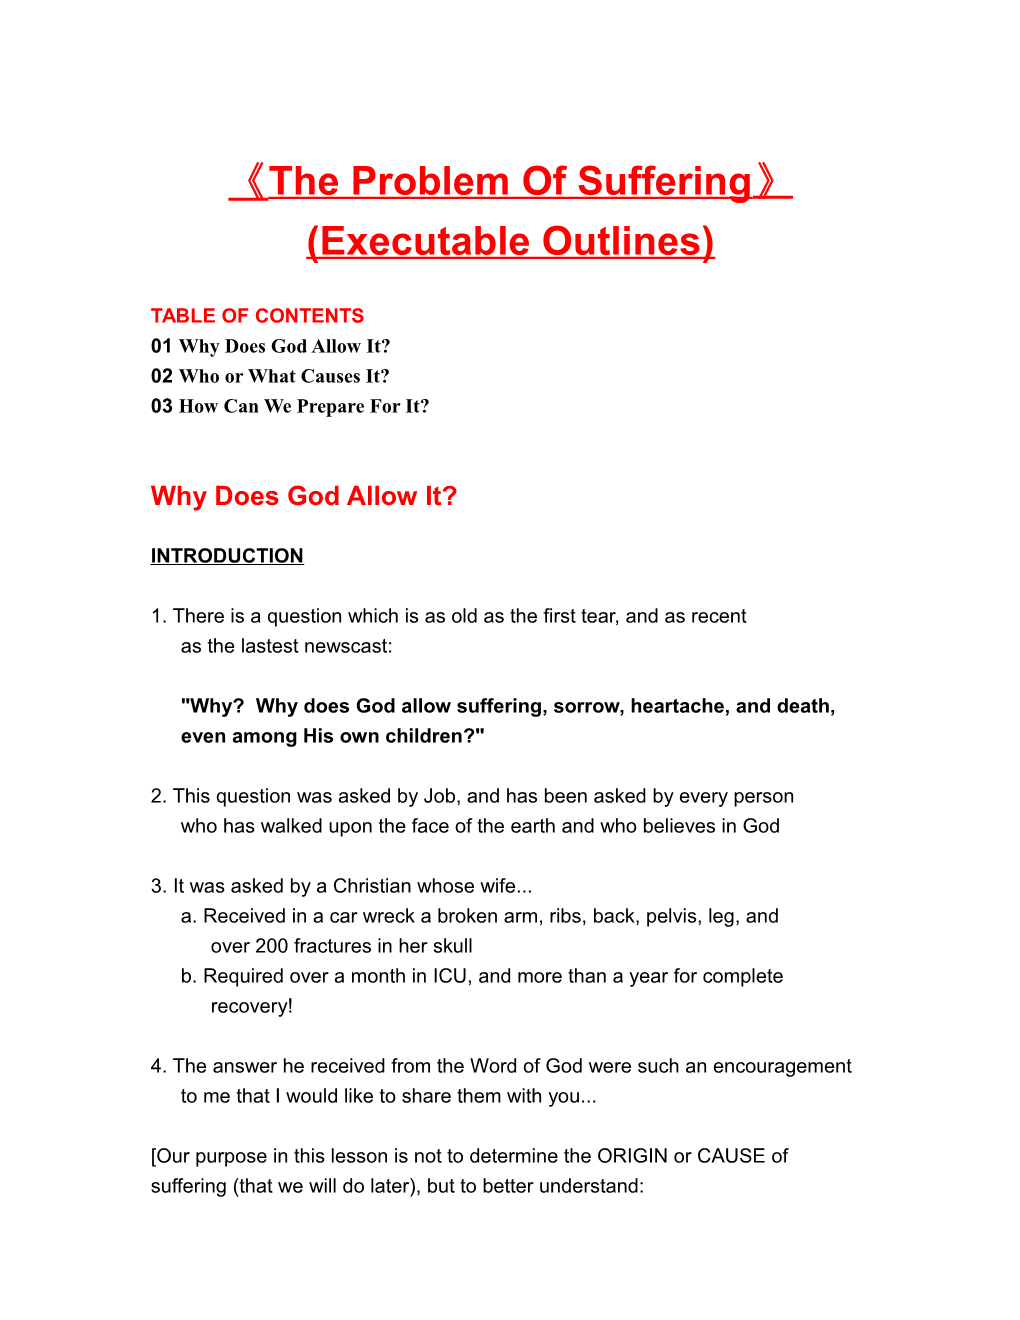 The Problem of Suffering (Executable Outlines)